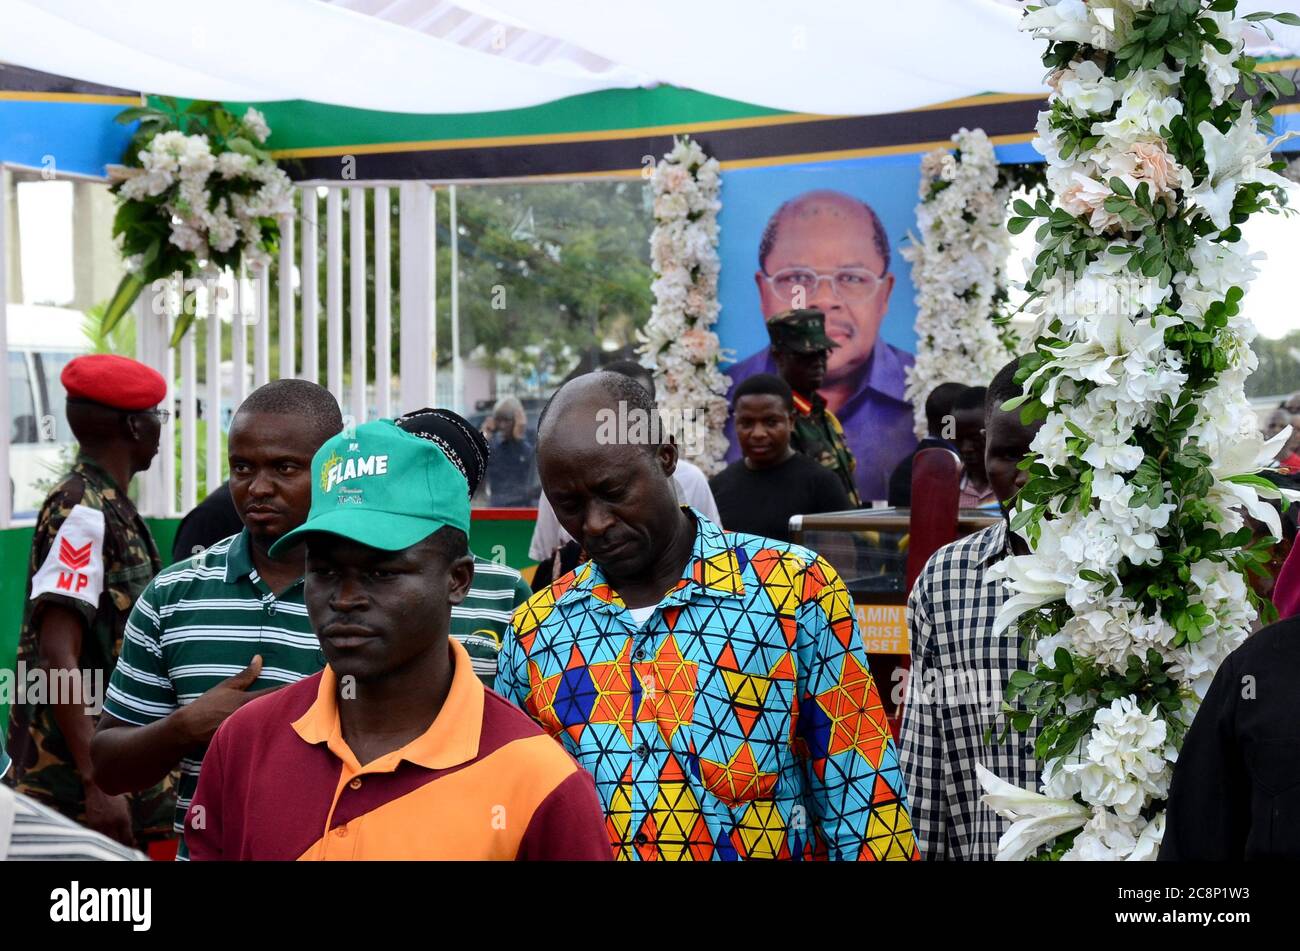 Dar Es Salaam. 26th July, 2020. People pay tribute to the late former president Benjamin Mkapa at Uhuru stadium in Dar es Salaam, Tanzania, July 26, 2020. Tanzania's former president Benjamin Mkapa died on Friday at the age of 81. Credit: Xinhua/Alamy Live News Stock Photo